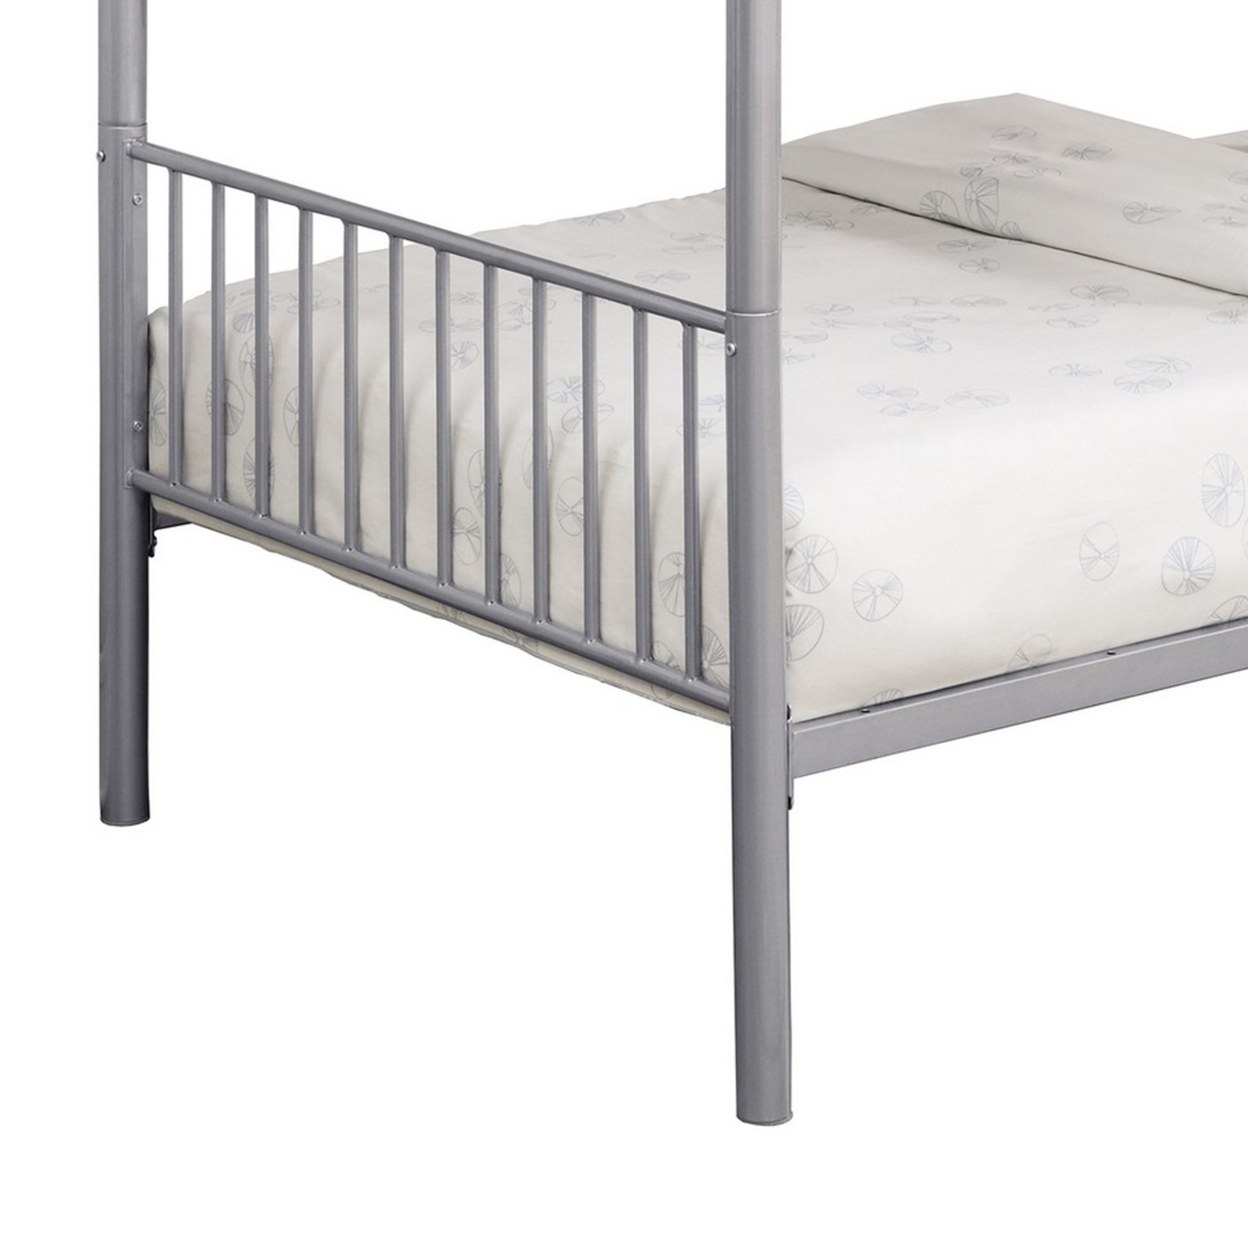 Demi 79 Inch Metal Twin Bunk Bed, Round Curved Headboard, Slatted, Gray